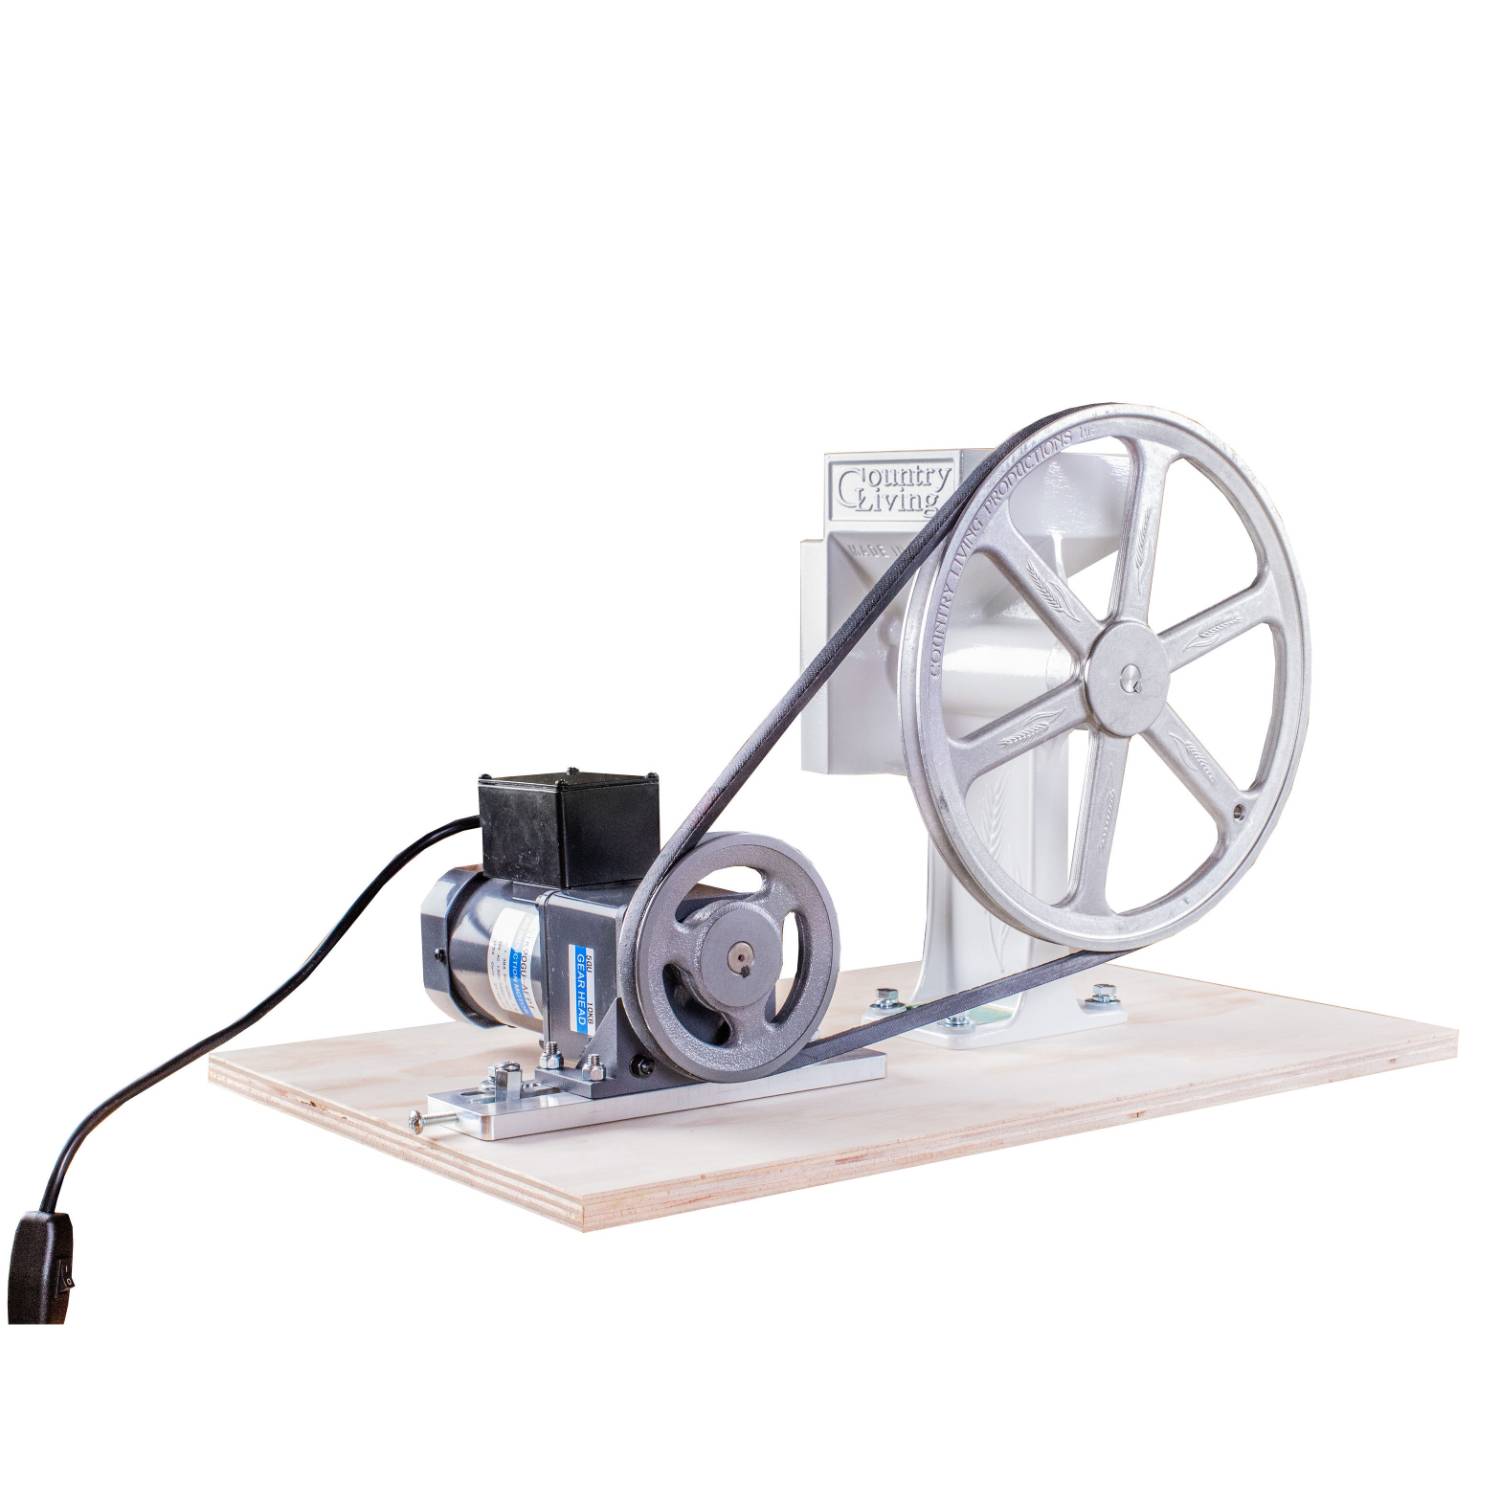 How do you assemble the grain mill?